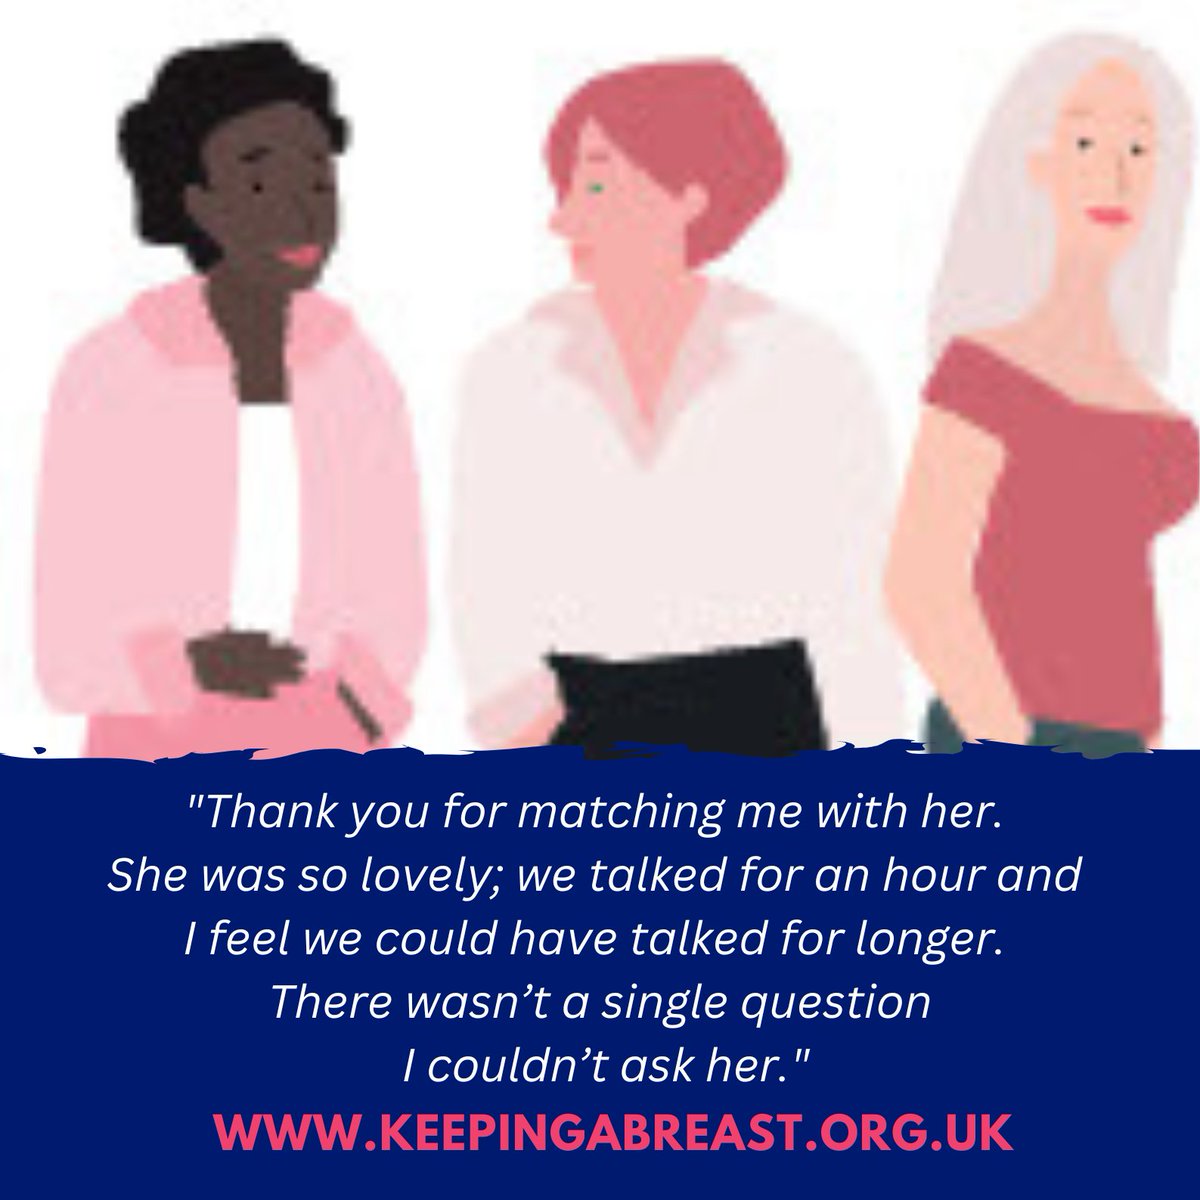 We're proud to offer a very personal support service, listening carefully to an individual's situation and concerns and supporting them accordingly. #testimonialthursday #breastreconstructionsupport